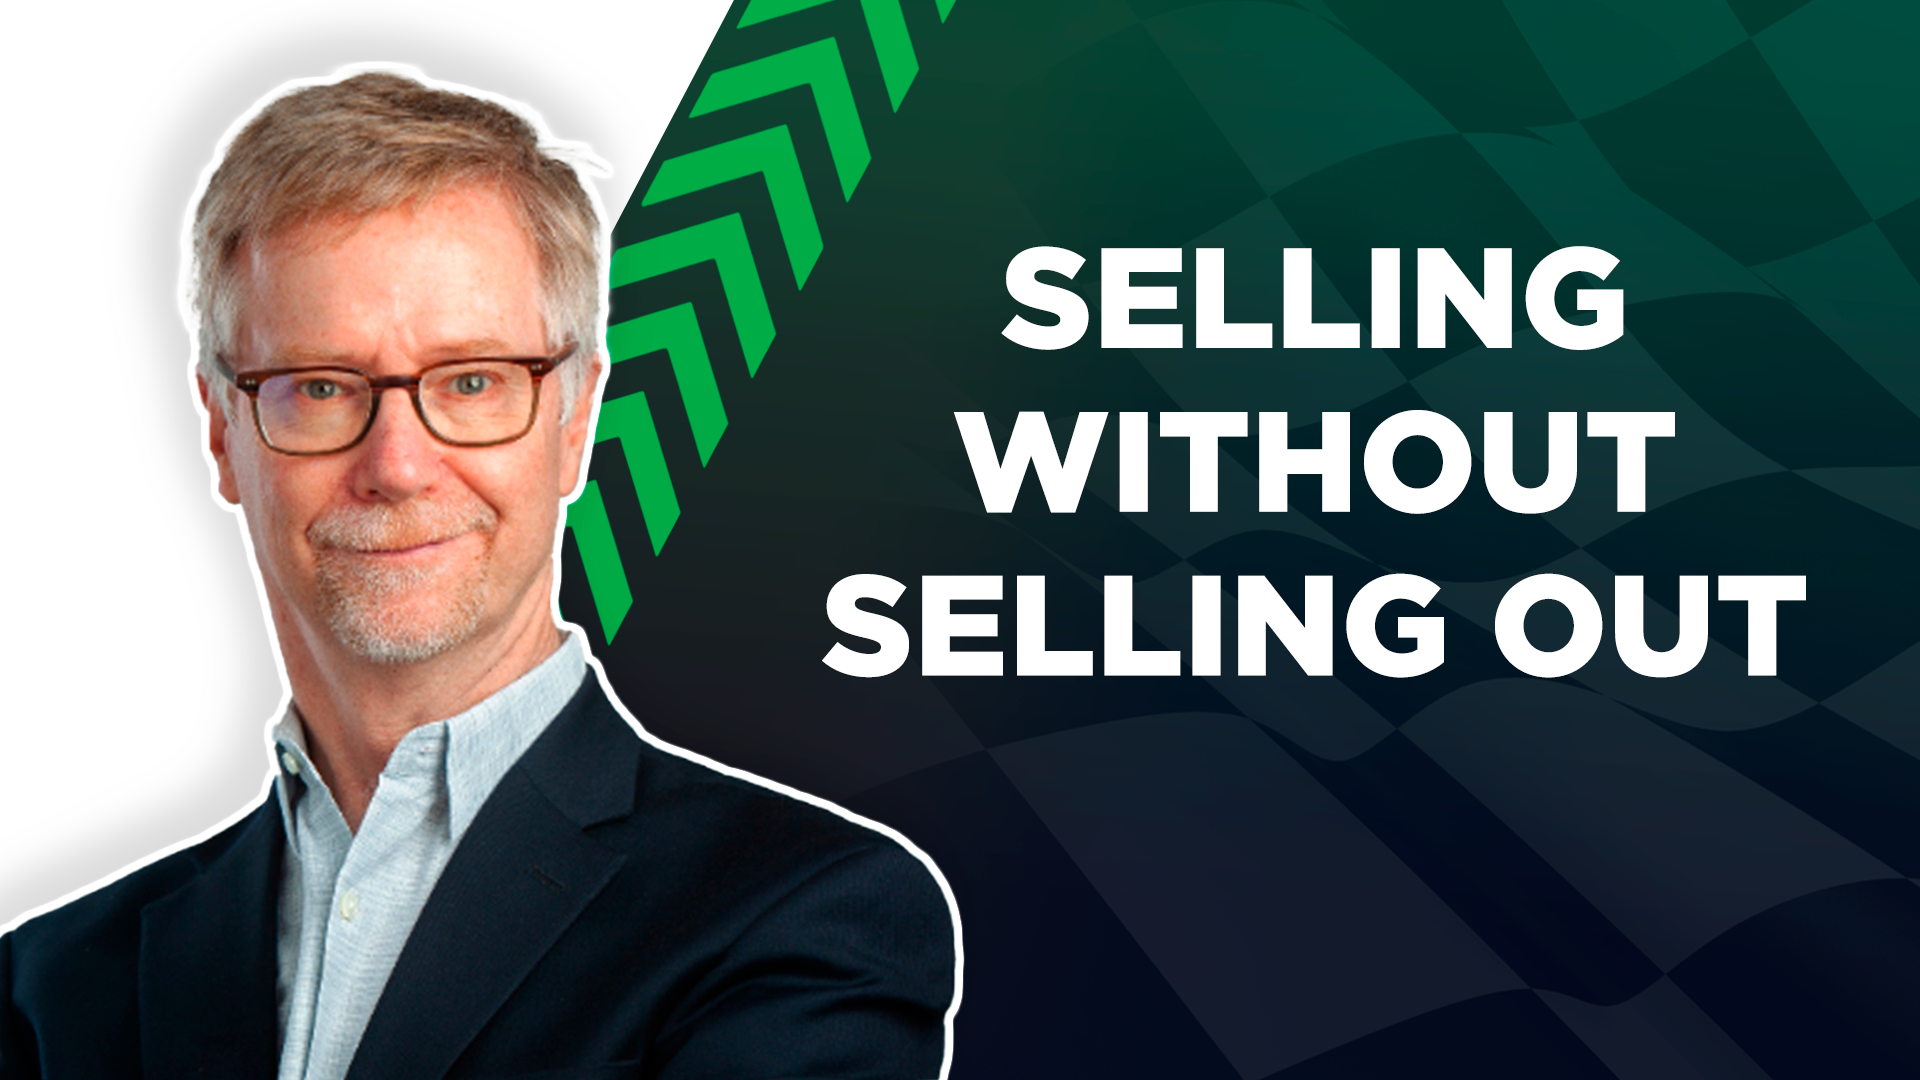 Podcast Pit Stop: Andy Paul on Selling Without Selling Out